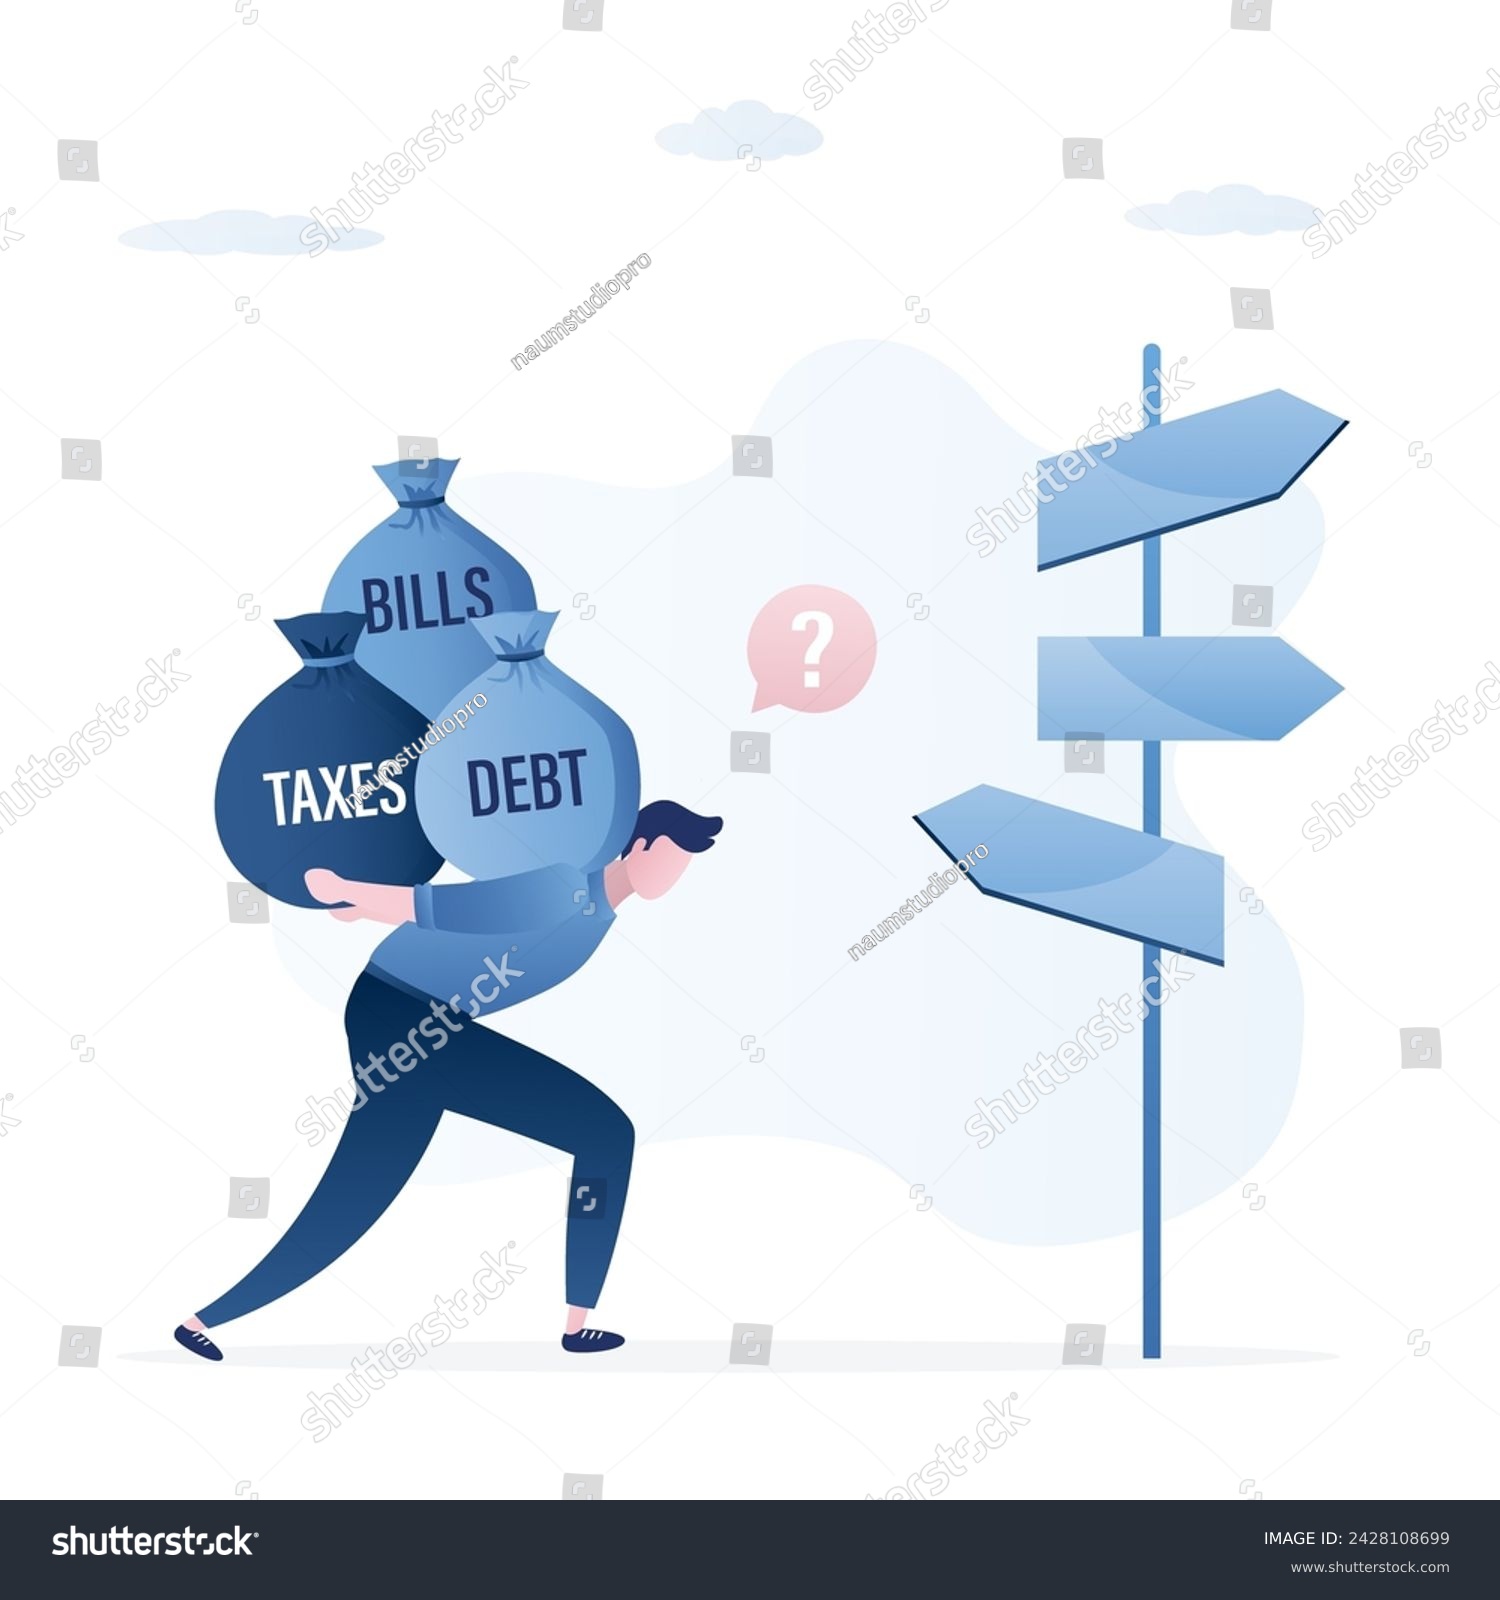 SVG of Depressed businessman carries bags of taxes, debts and bills. Financial, debt burden. Male character choose of rights ways. Economic crisis, bad money management. Bankruptcy. Flat vector illustration svg